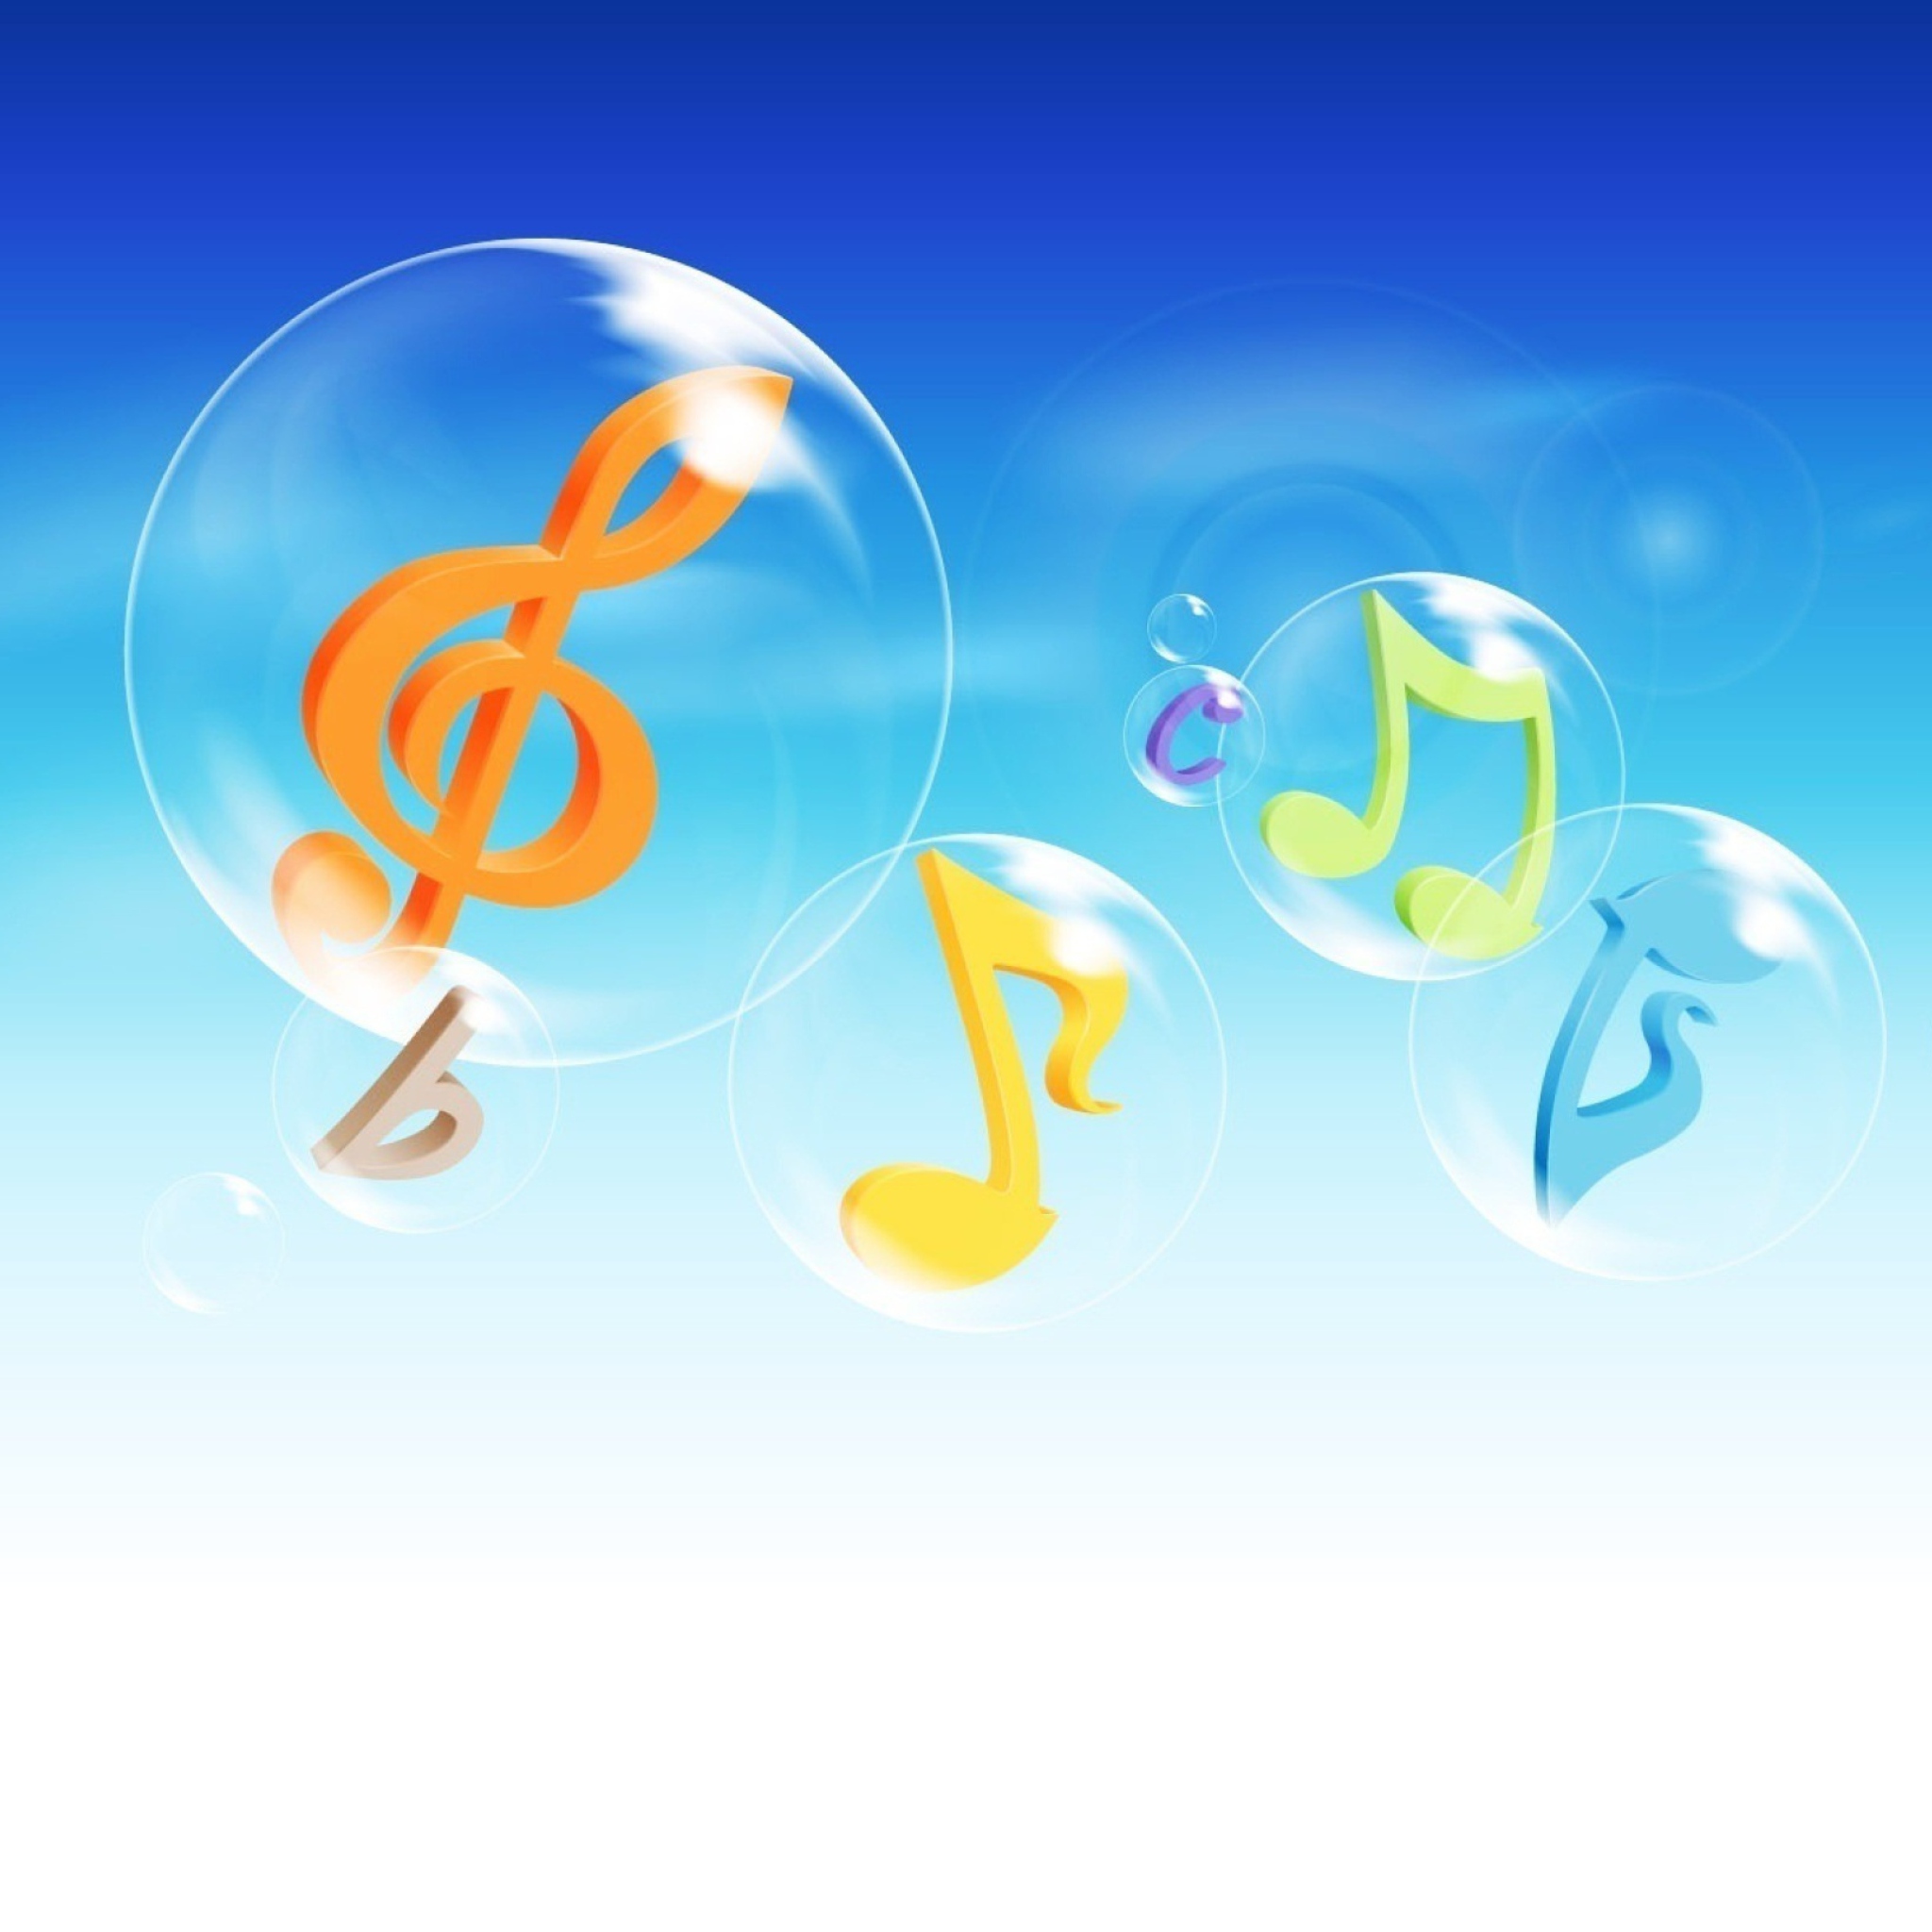 Musical Notes In Bubbles screenshot #1 2048x2048